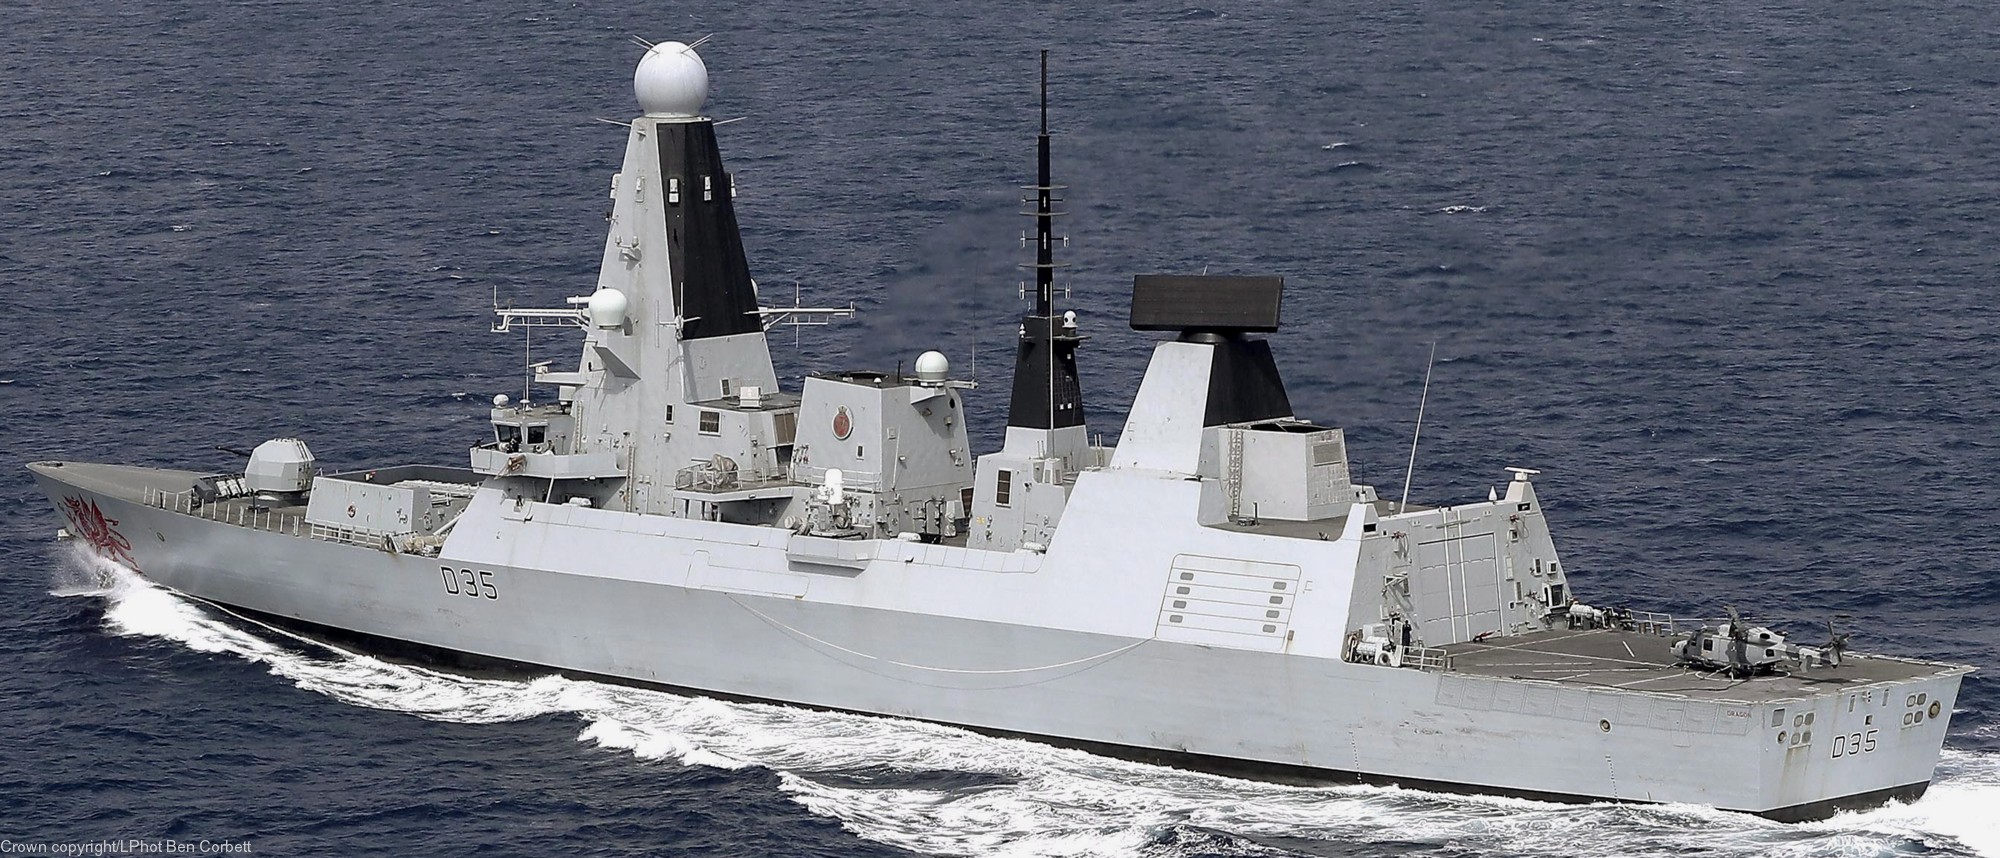 d35 hms dragon d-35 type 45 daring class guided missile destroyer ddg royal navy sea viper paams 39